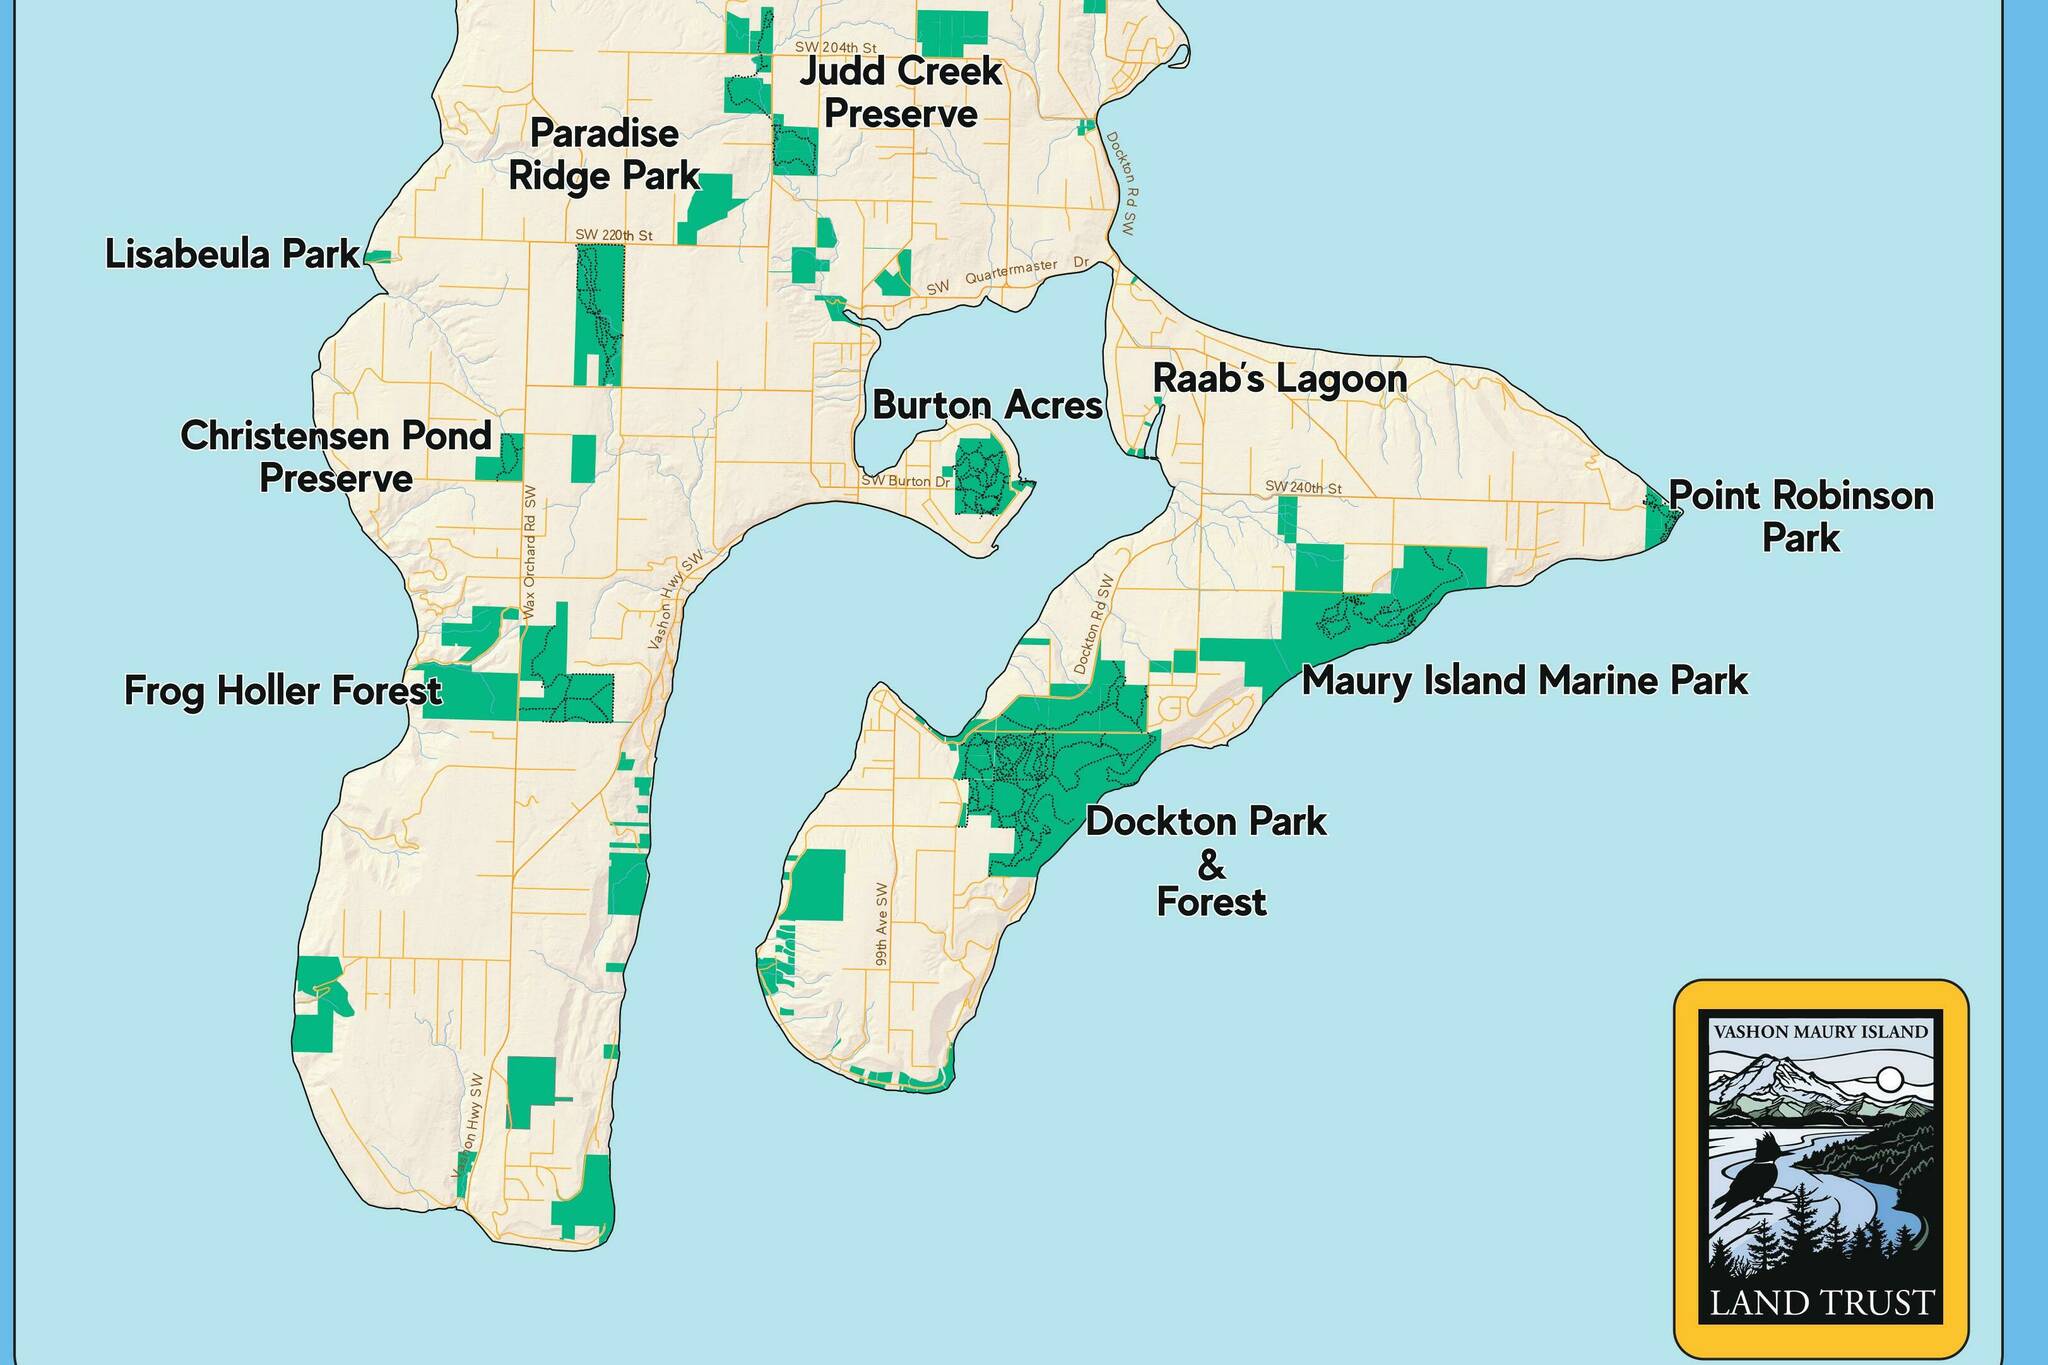 This map shows the latest view of public parks and preserves on the island. The two newest additions are a large chunk of property west of Wax Orchard Road, significantly growing Frog Holler Forest, and a large chunk south of Dockton that grows the Manzanita Natural Area. Image courtesy Vashon-Maury Island Land Trust.